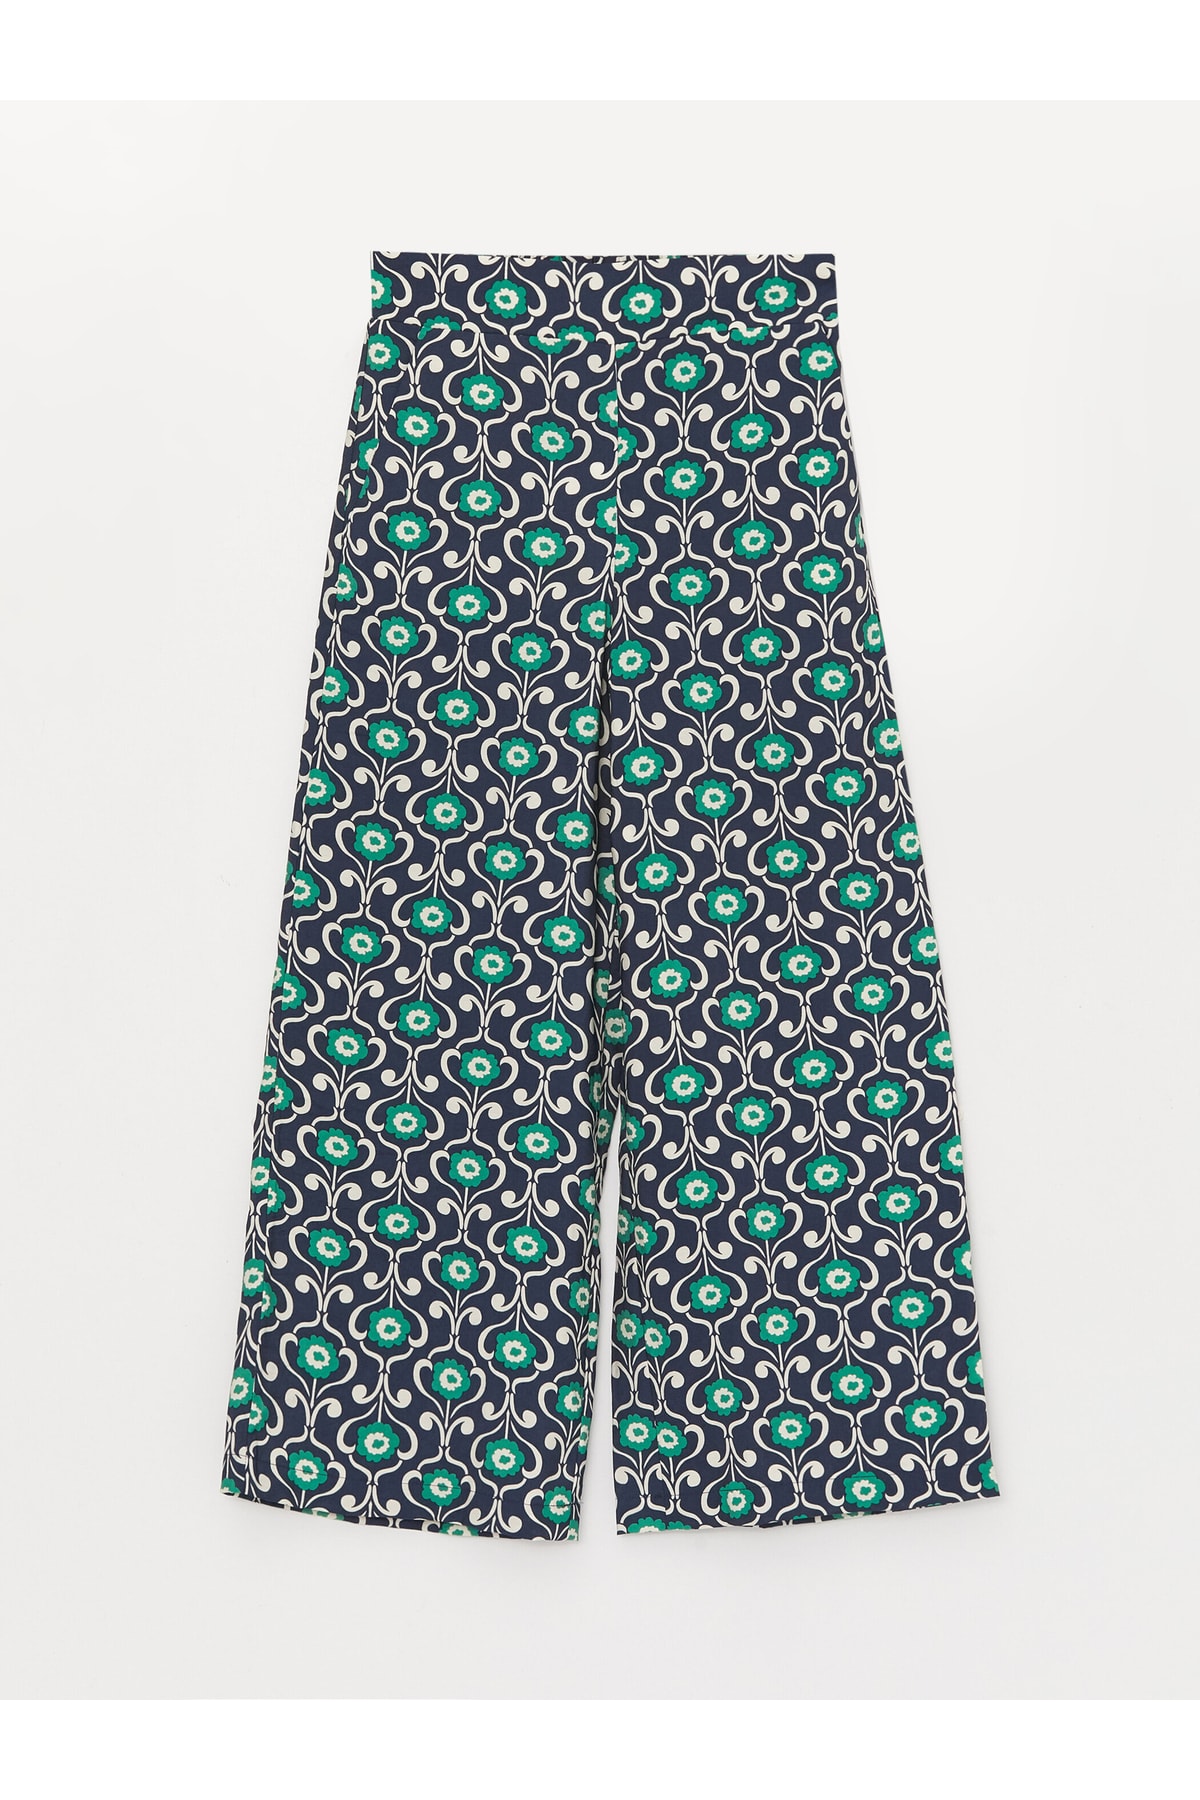 LC Waikiki Women's Capri with an elasticated waist, comfy fit and a floral pattern.